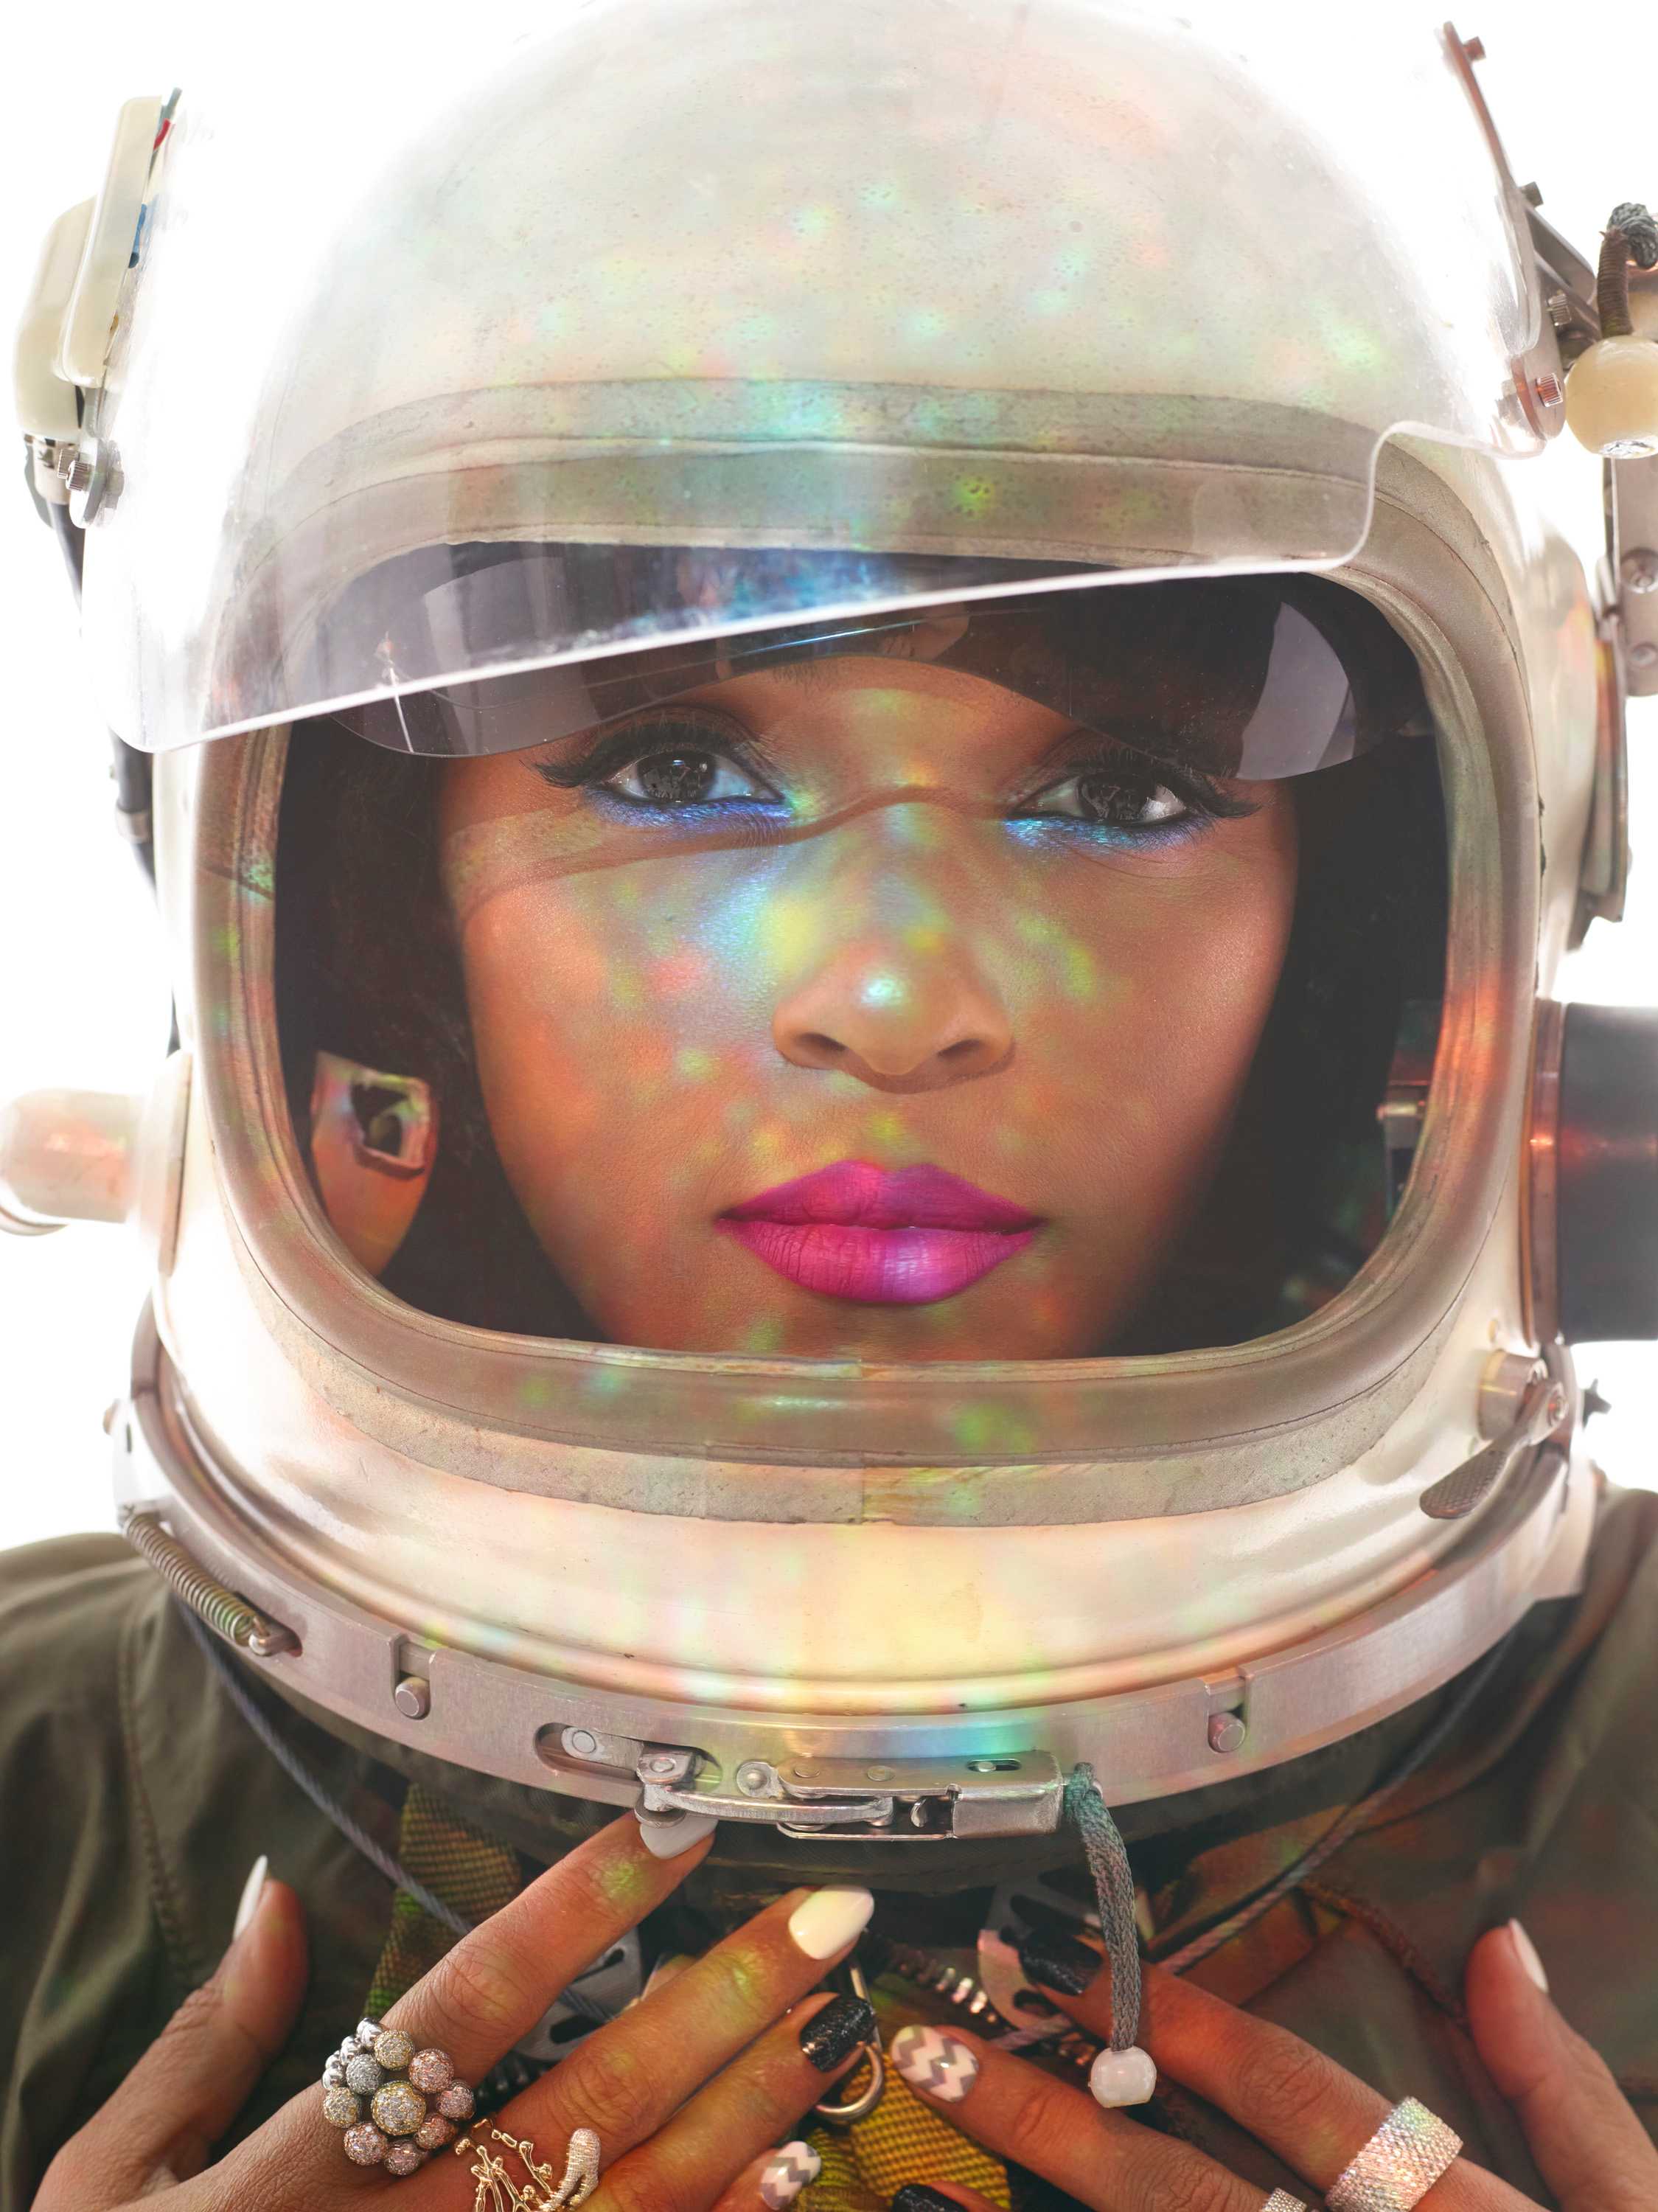 A close shot of Janelle Monáe wearing a space helmet and pink lipstick in a futurist look.